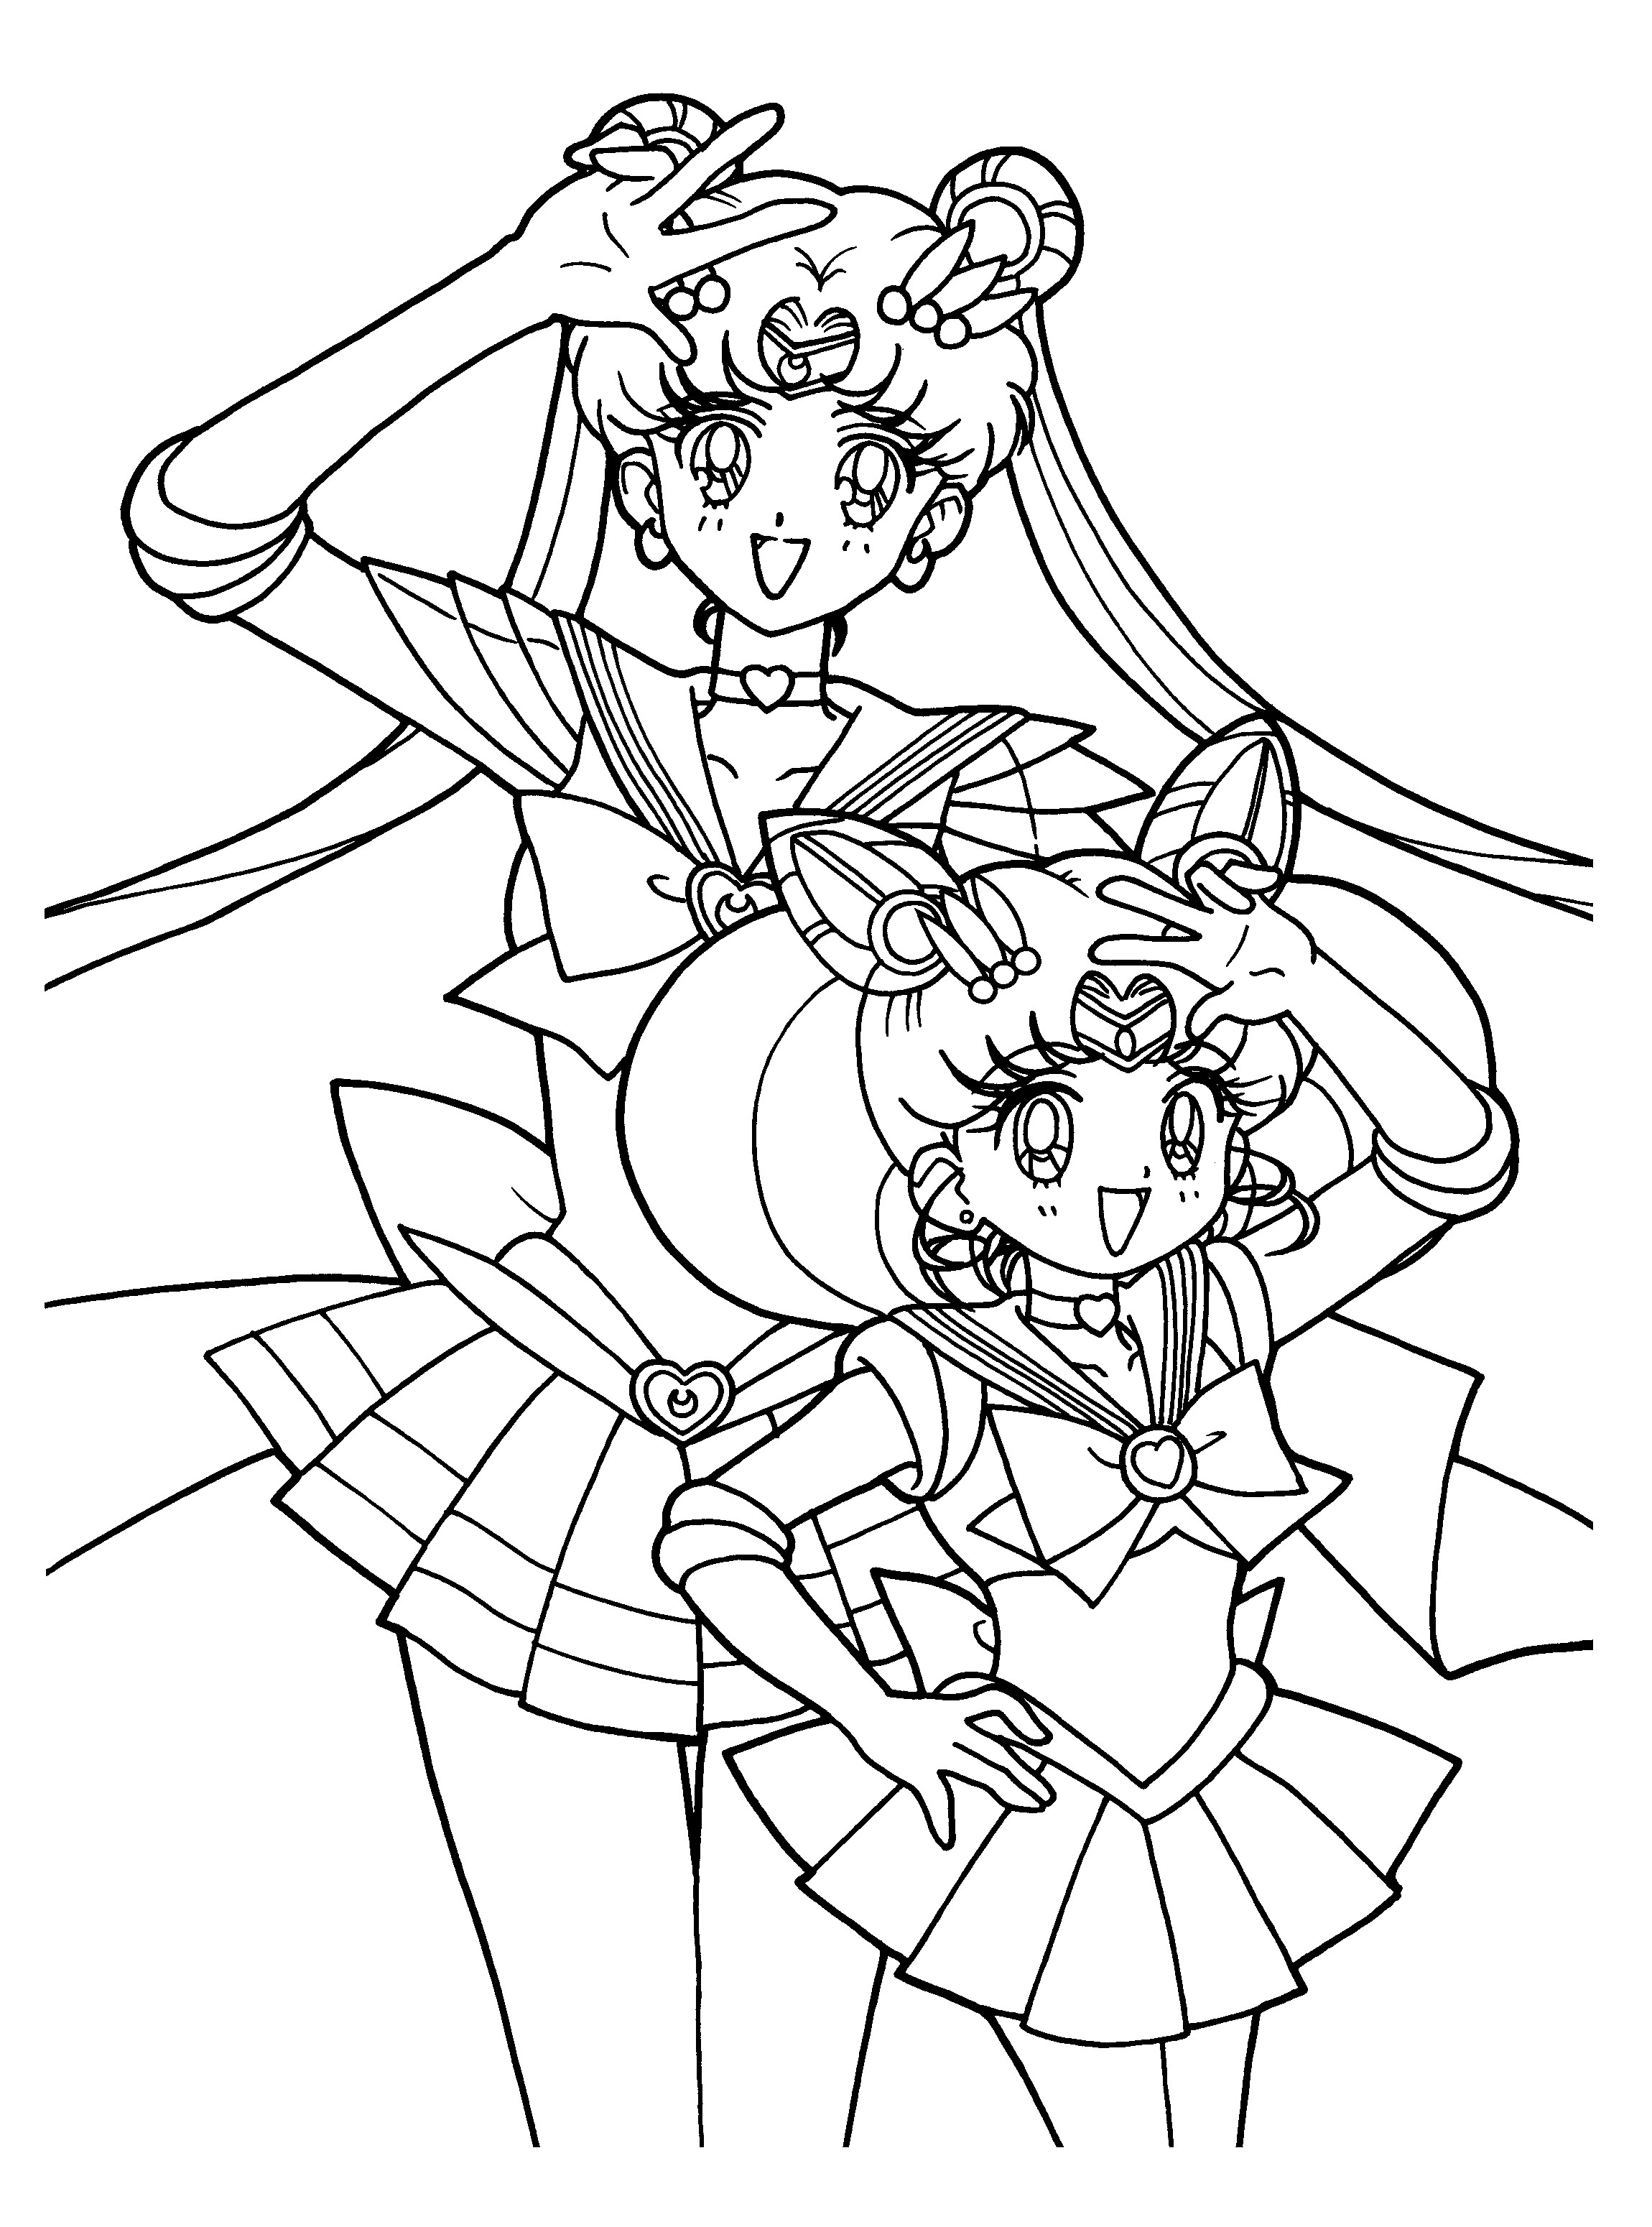 Fun Coloring Sheets For Kids
 Free Printable Sailor Moon Coloring Pages For Kids